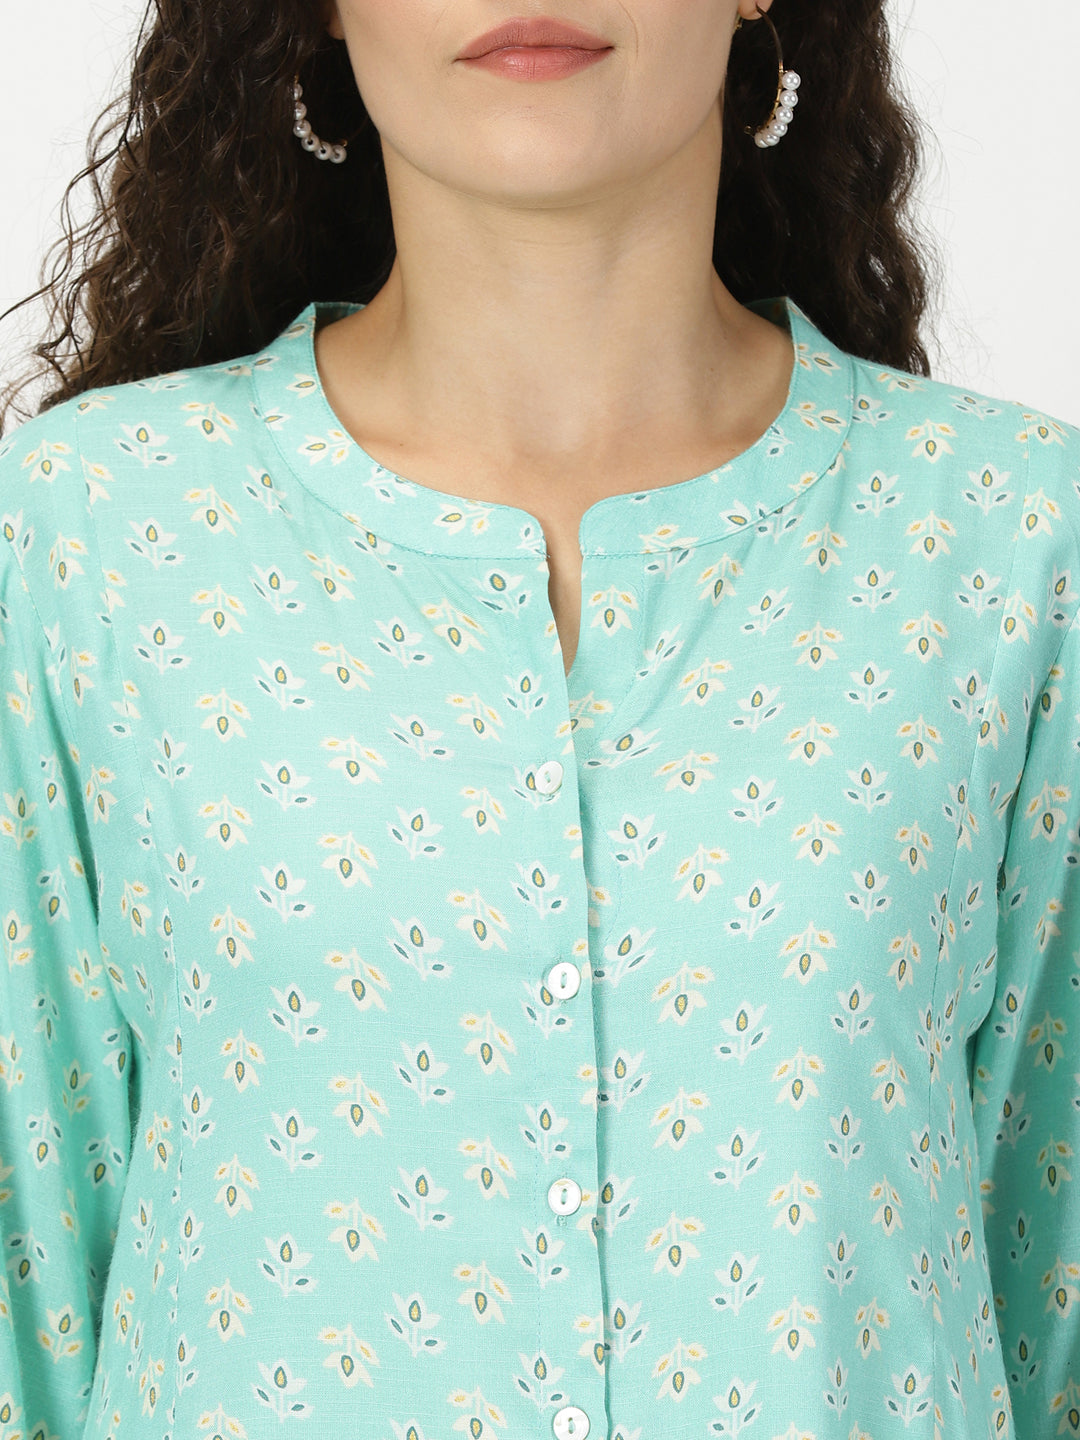 Sea Green Floral Print Button-Down Kurta with Embroidery Border